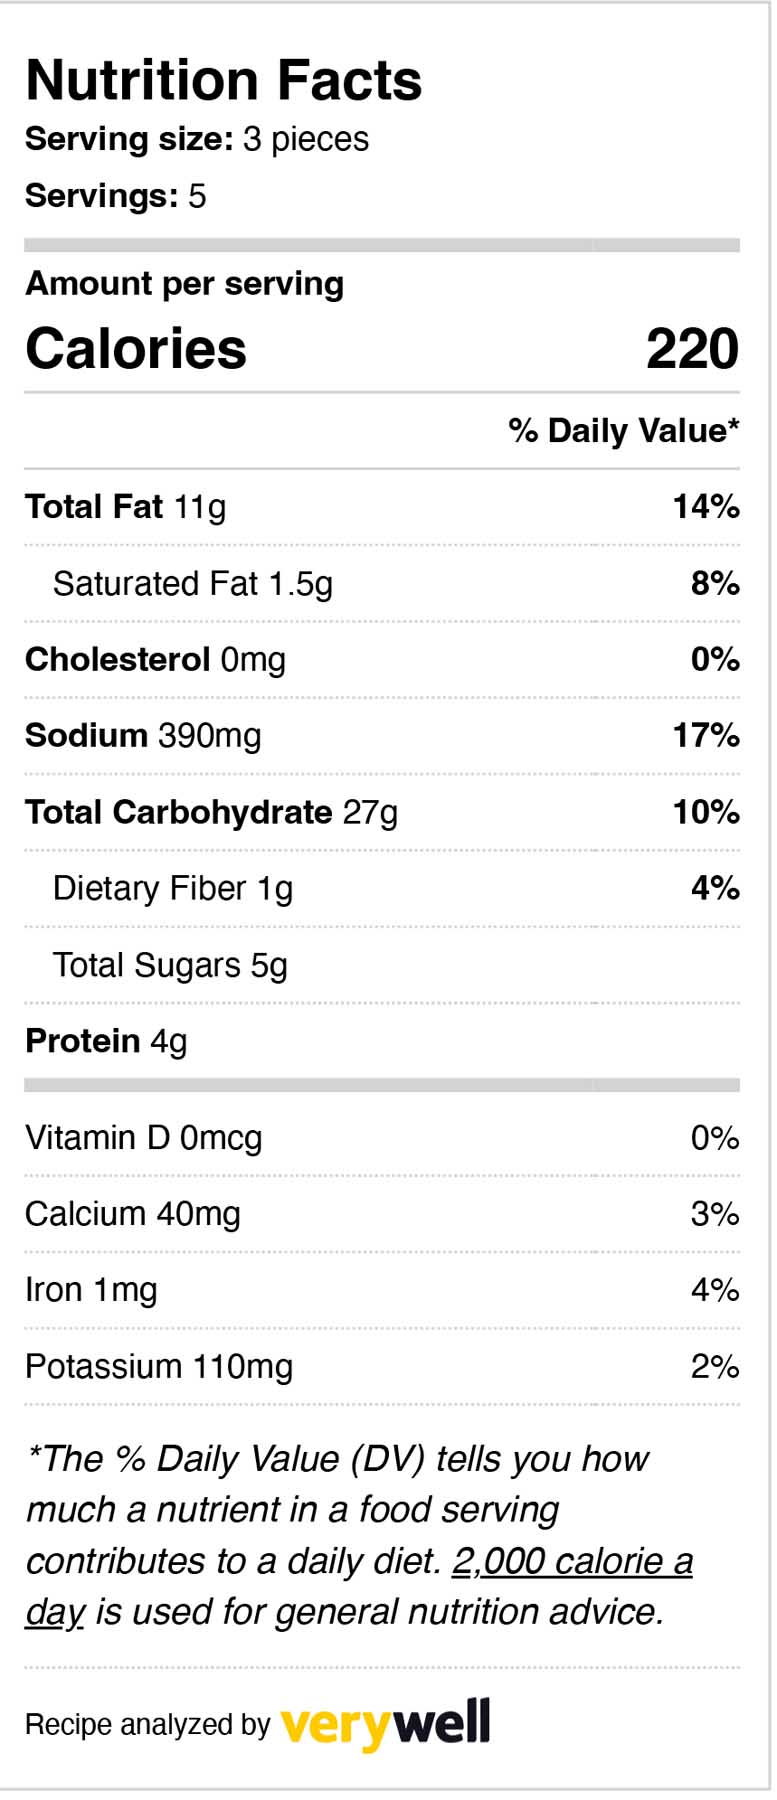 table of nutrition facts